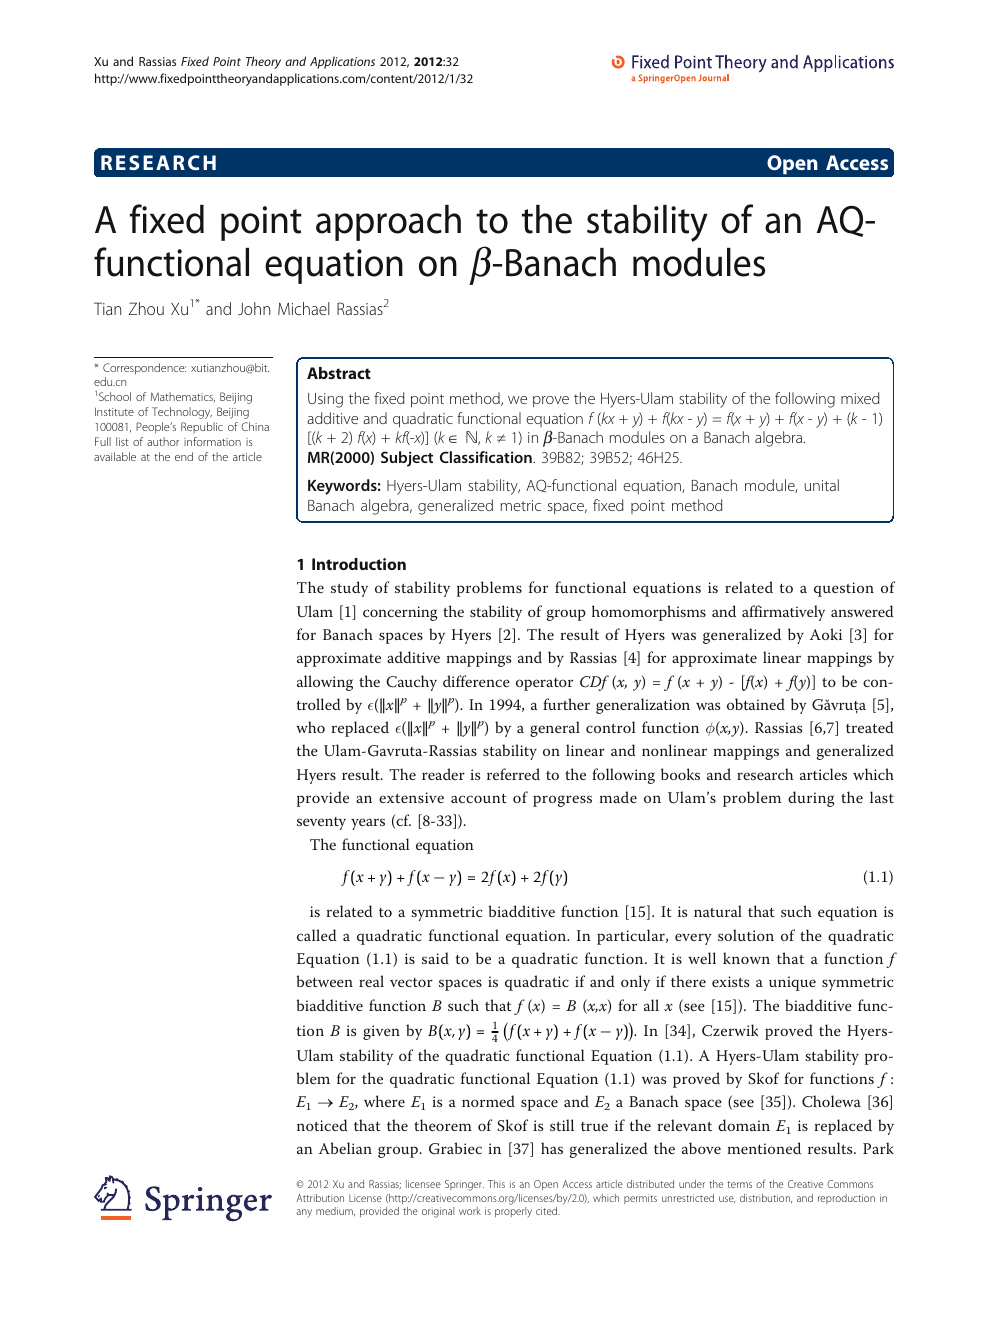 A Fixed Point Approach To The Stability Of An Aq Functional Equation On Beta Banach Modules Topic Of Research Paper In Mathematics Download Scholarly Article Pdf And Read For Free On Cyberleninka Open